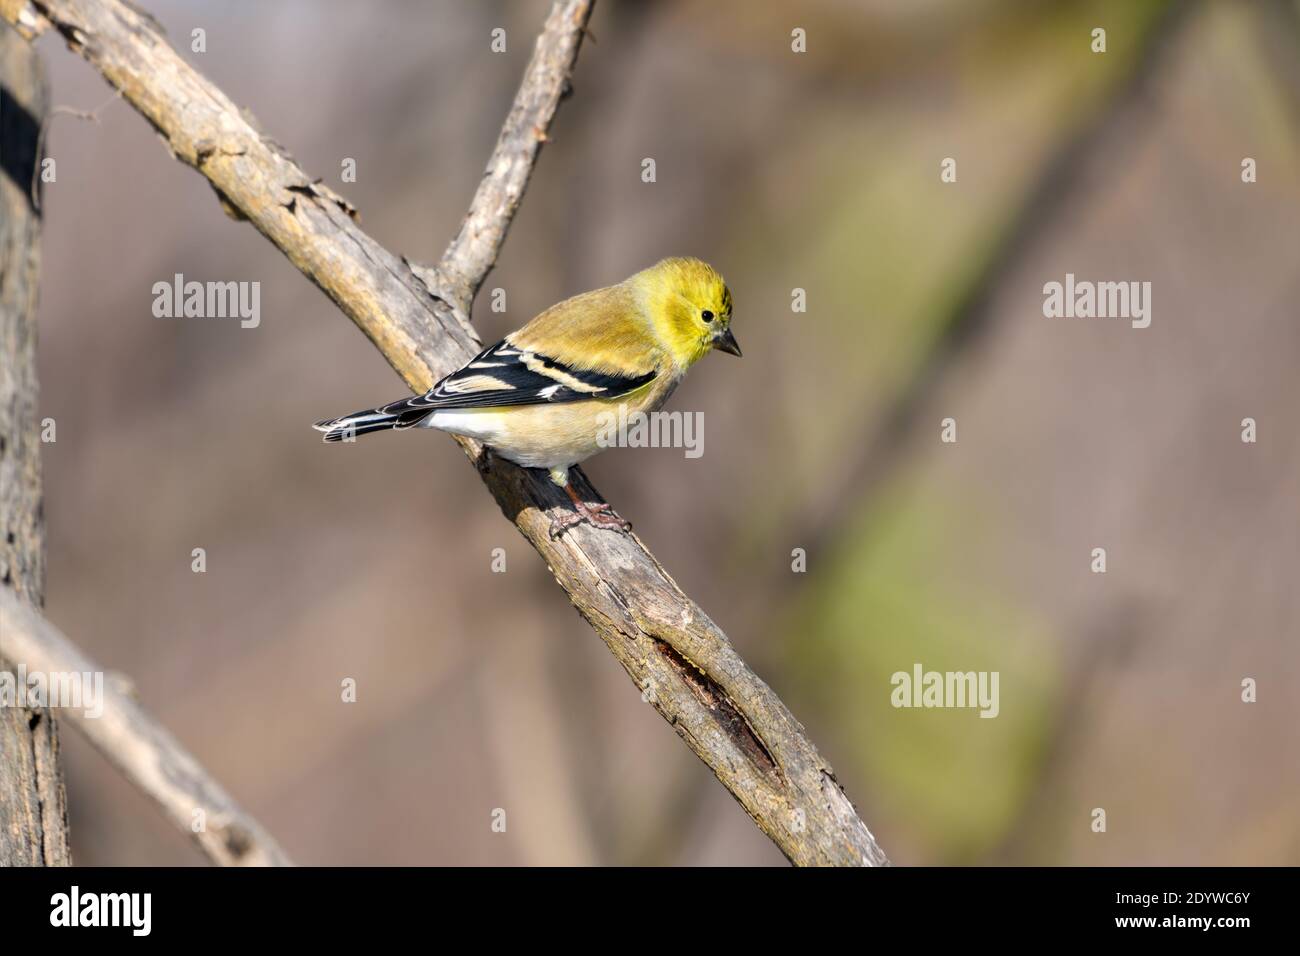 american Goldfinch - Spinus tristis - Perched on tree branch Stock Photo